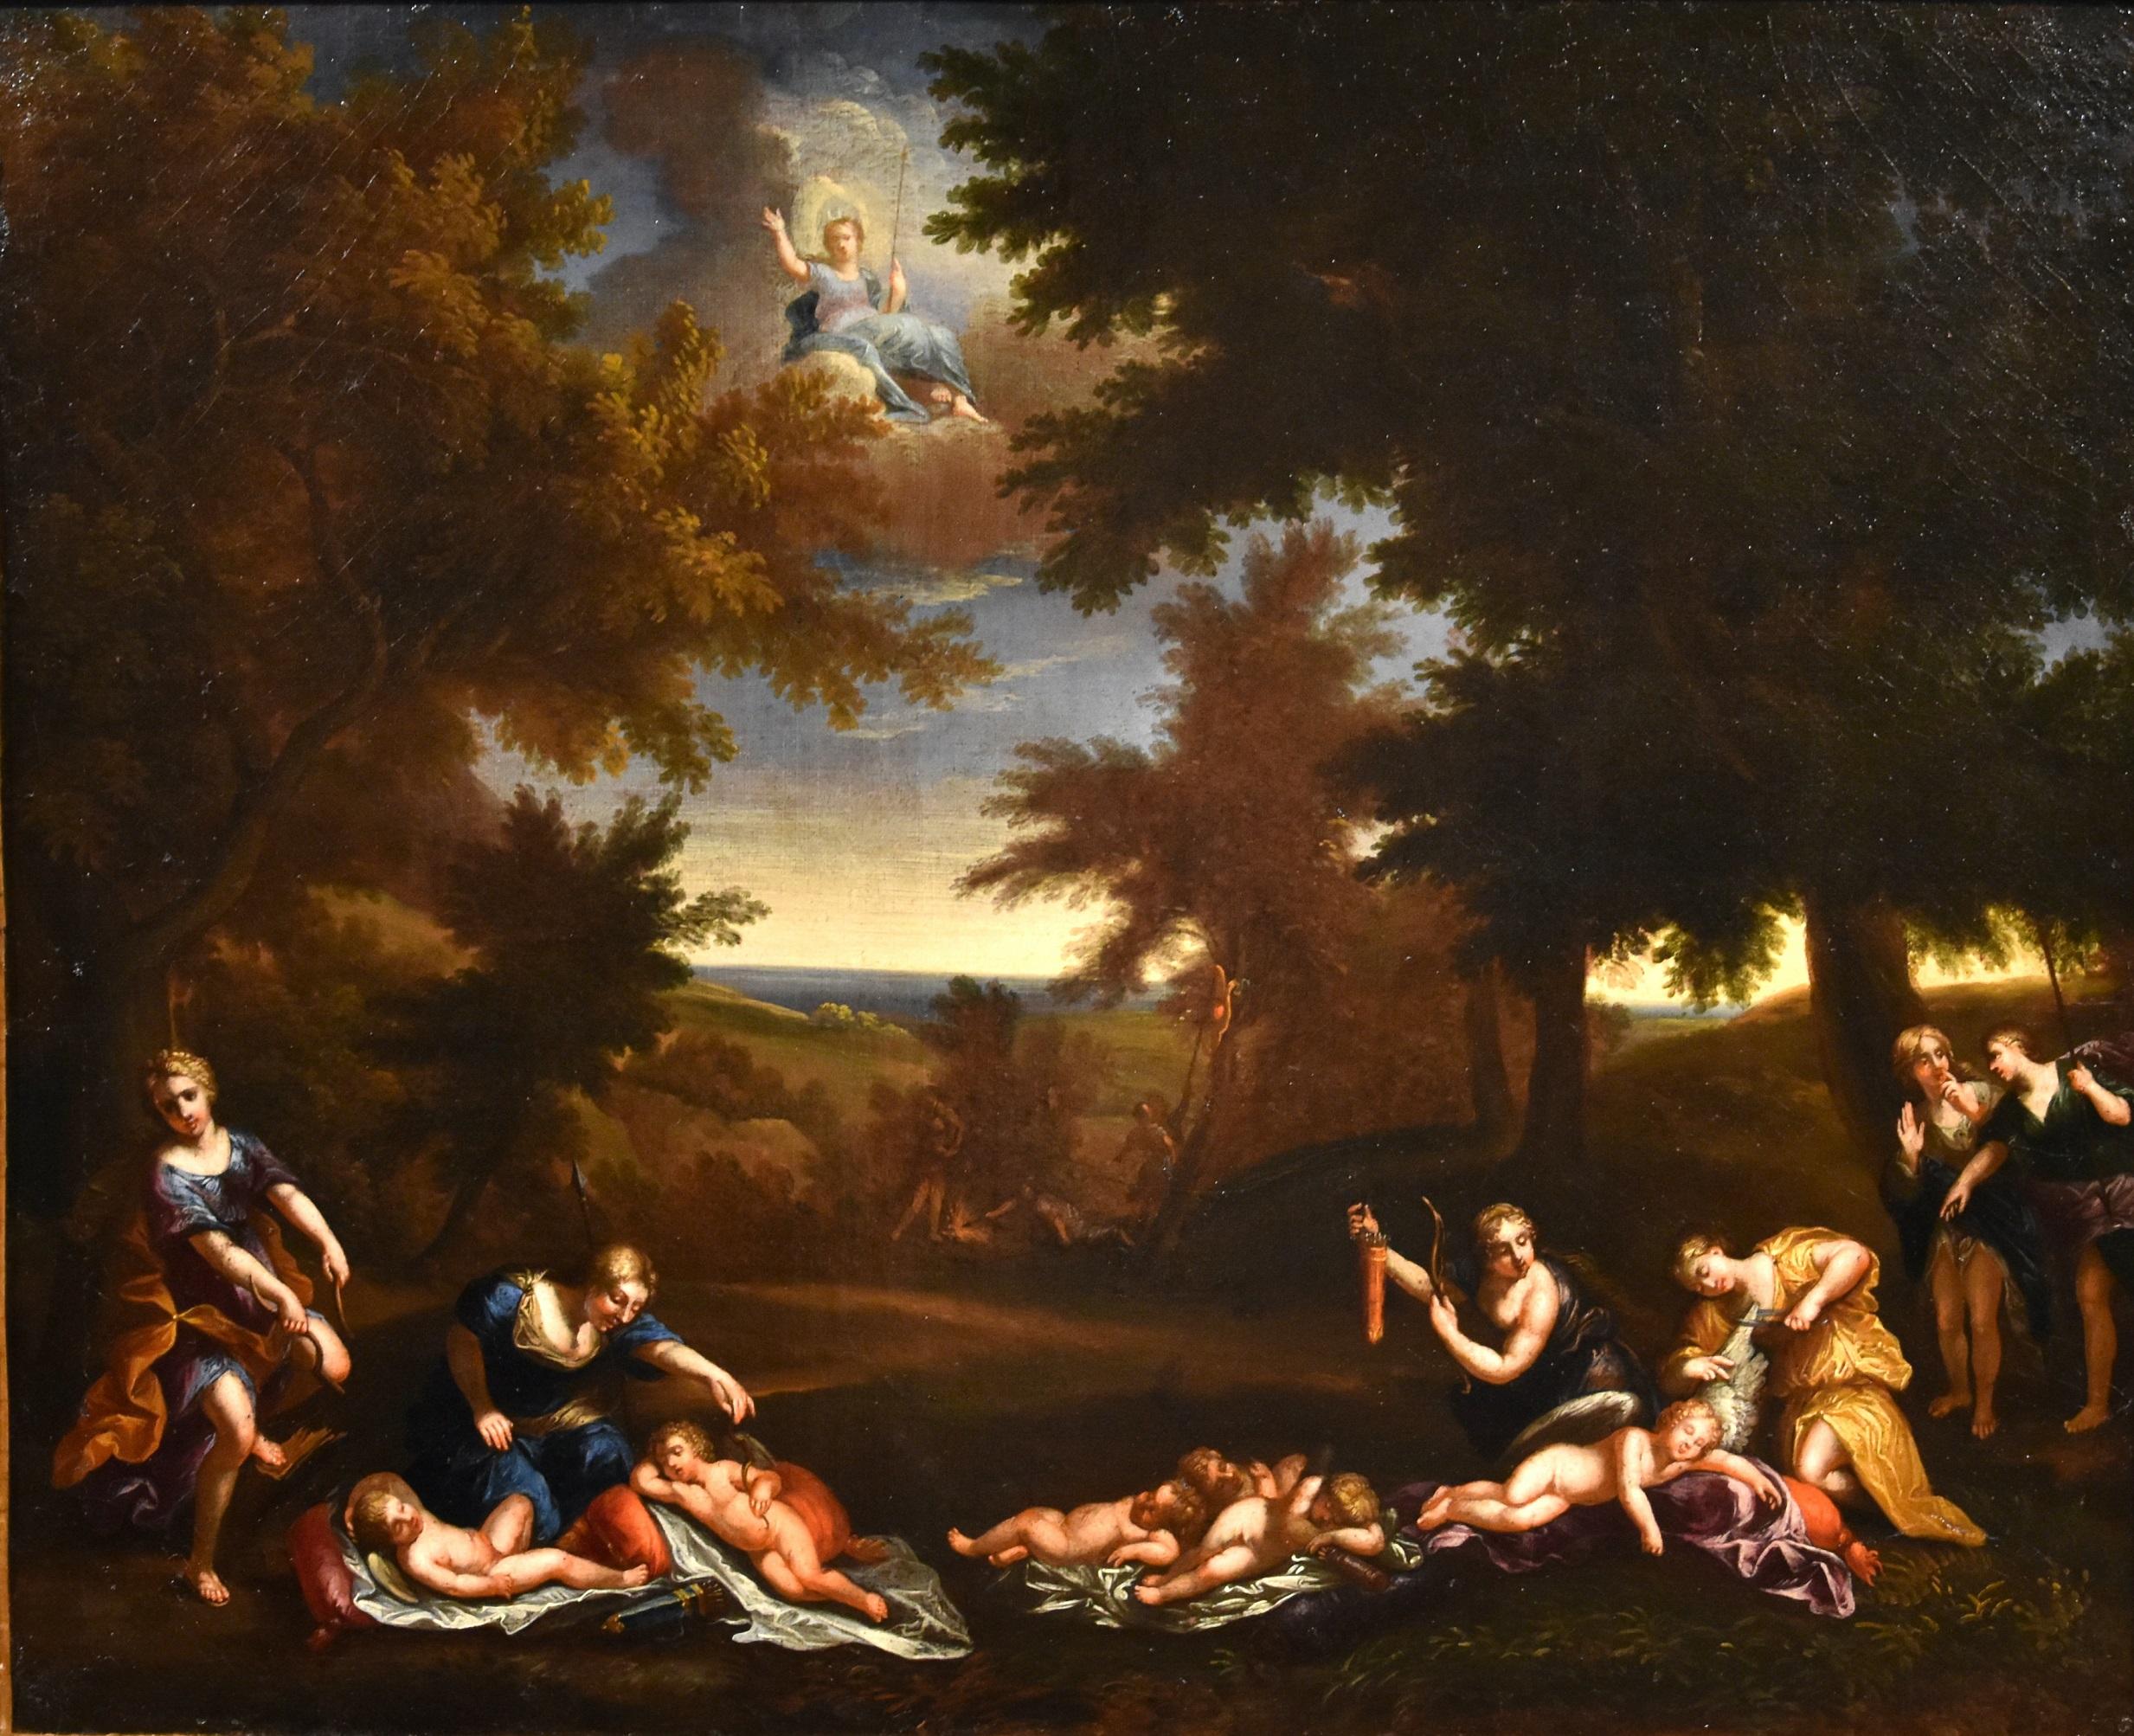 Nymphs Albani Paint Oil on canvas 17th Century Old master Italy Landscape Italy - Painting by Francesco Albani (Bologna 1578 - 1660)